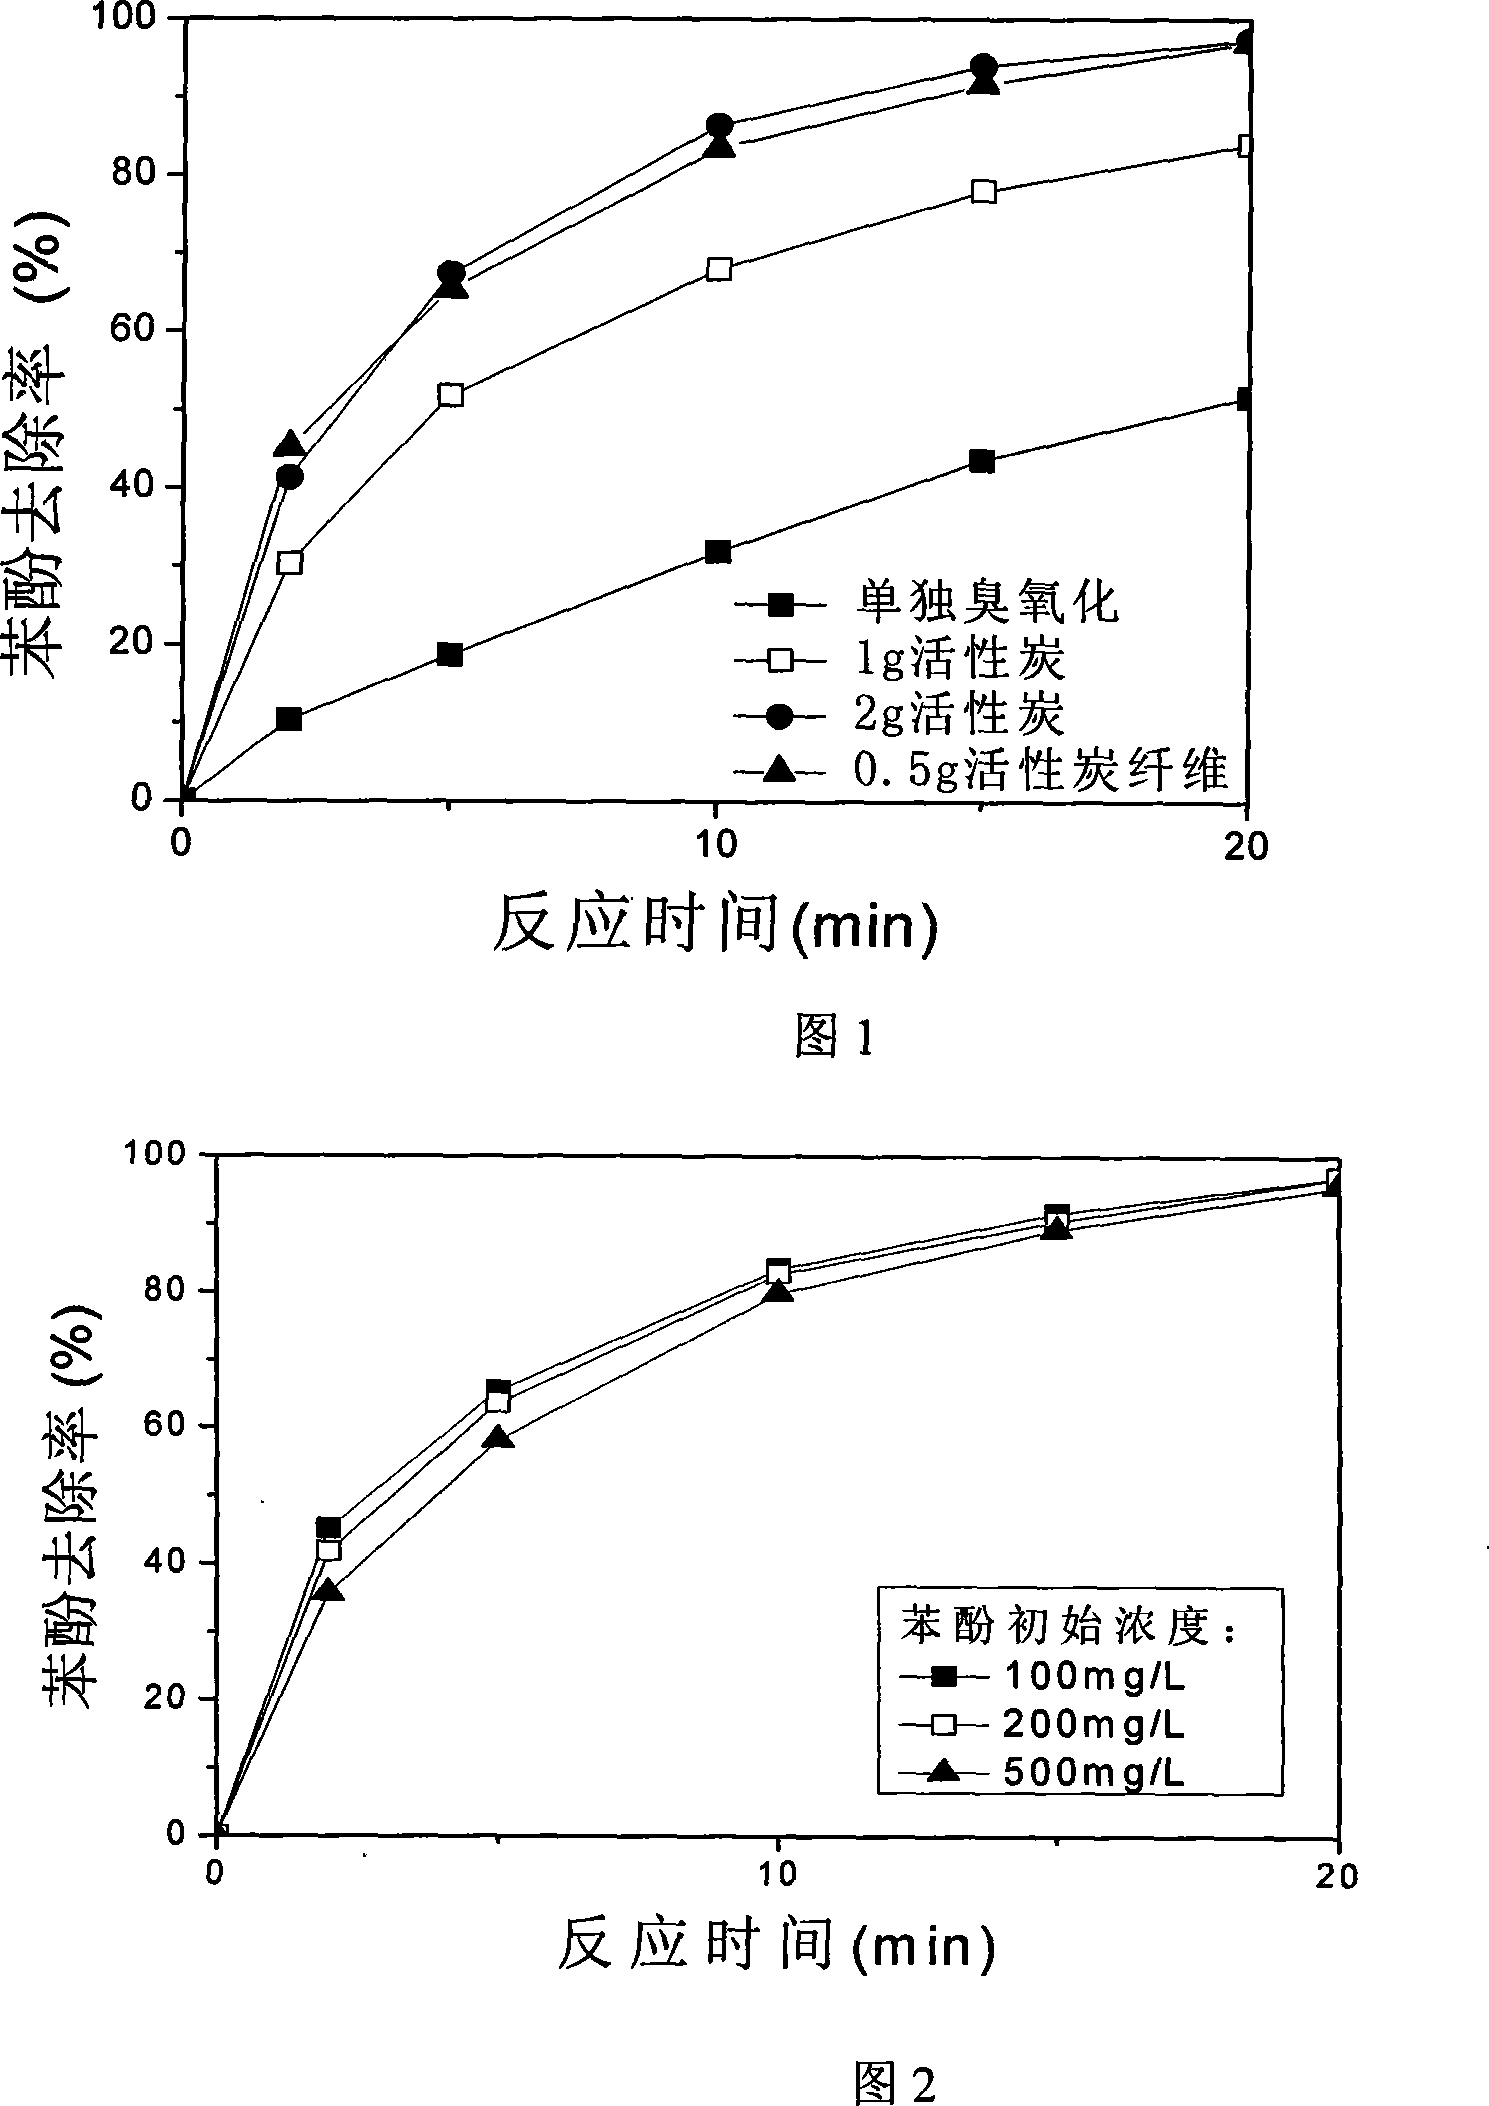 Method for carrying water treatment by active carbon fiber-ozone oxidization combination